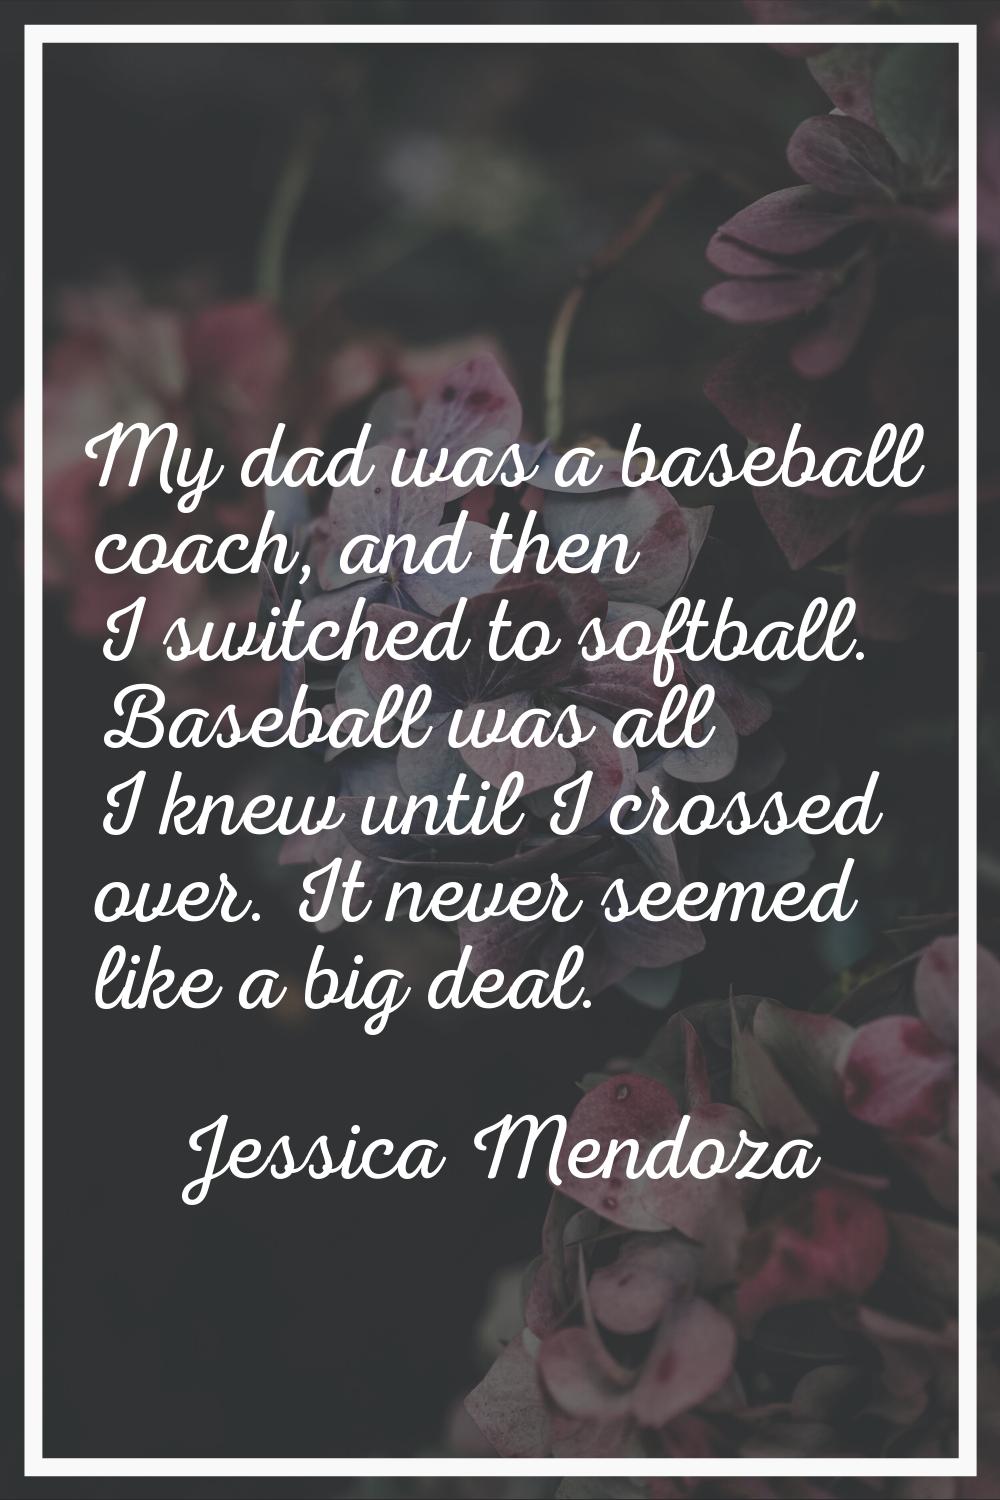 My dad was a baseball coach, and then I switched to softball. Baseball was all I knew until I cross